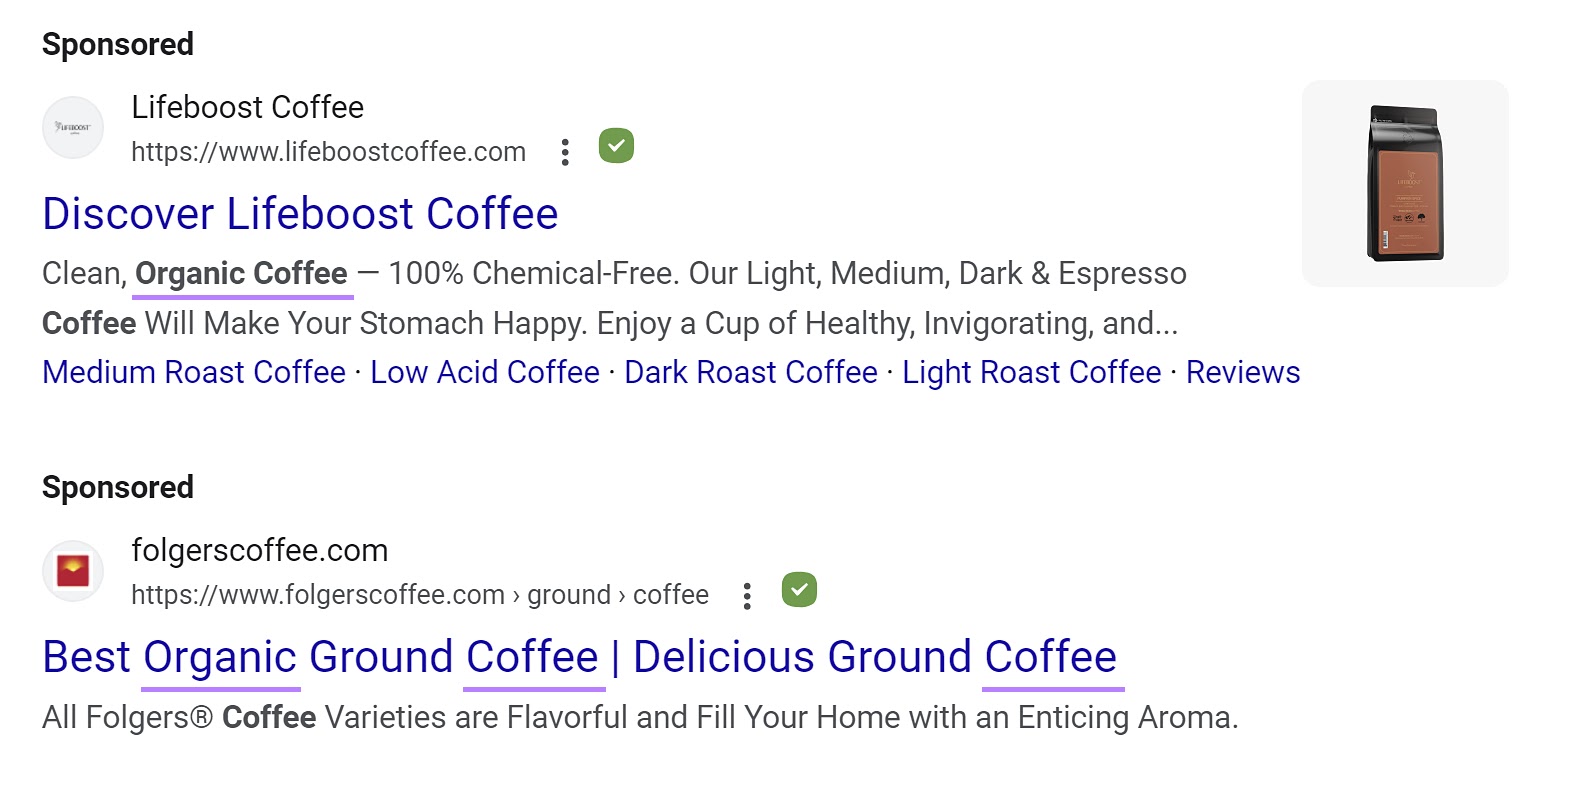 A Guide to Paid Search Ads: Definition + How to Set up Campaigns